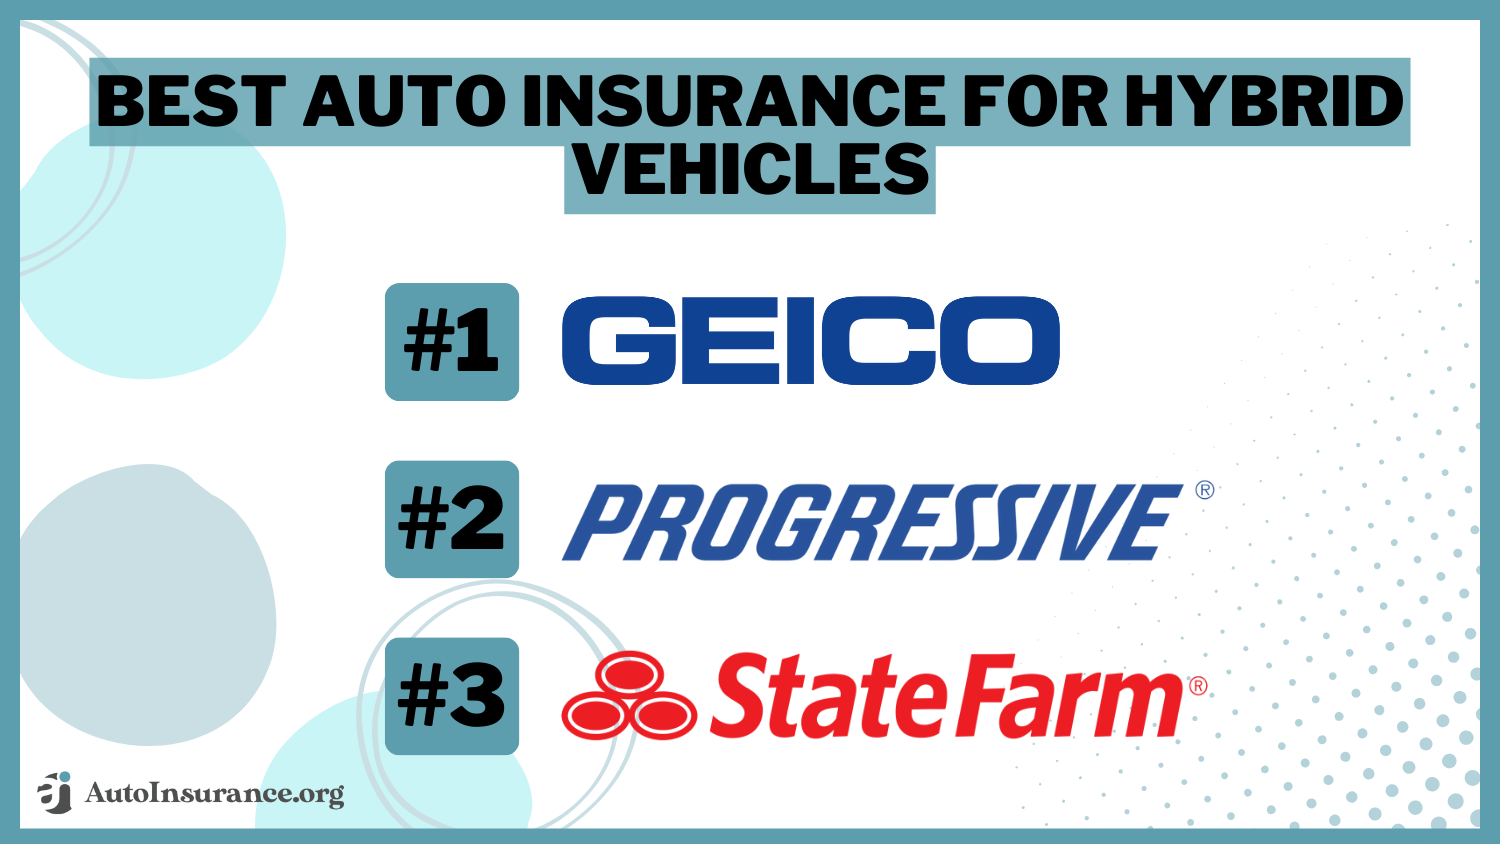 Geico progressive and state farm are the Best Auto Insurance for Hybrid Vehicles